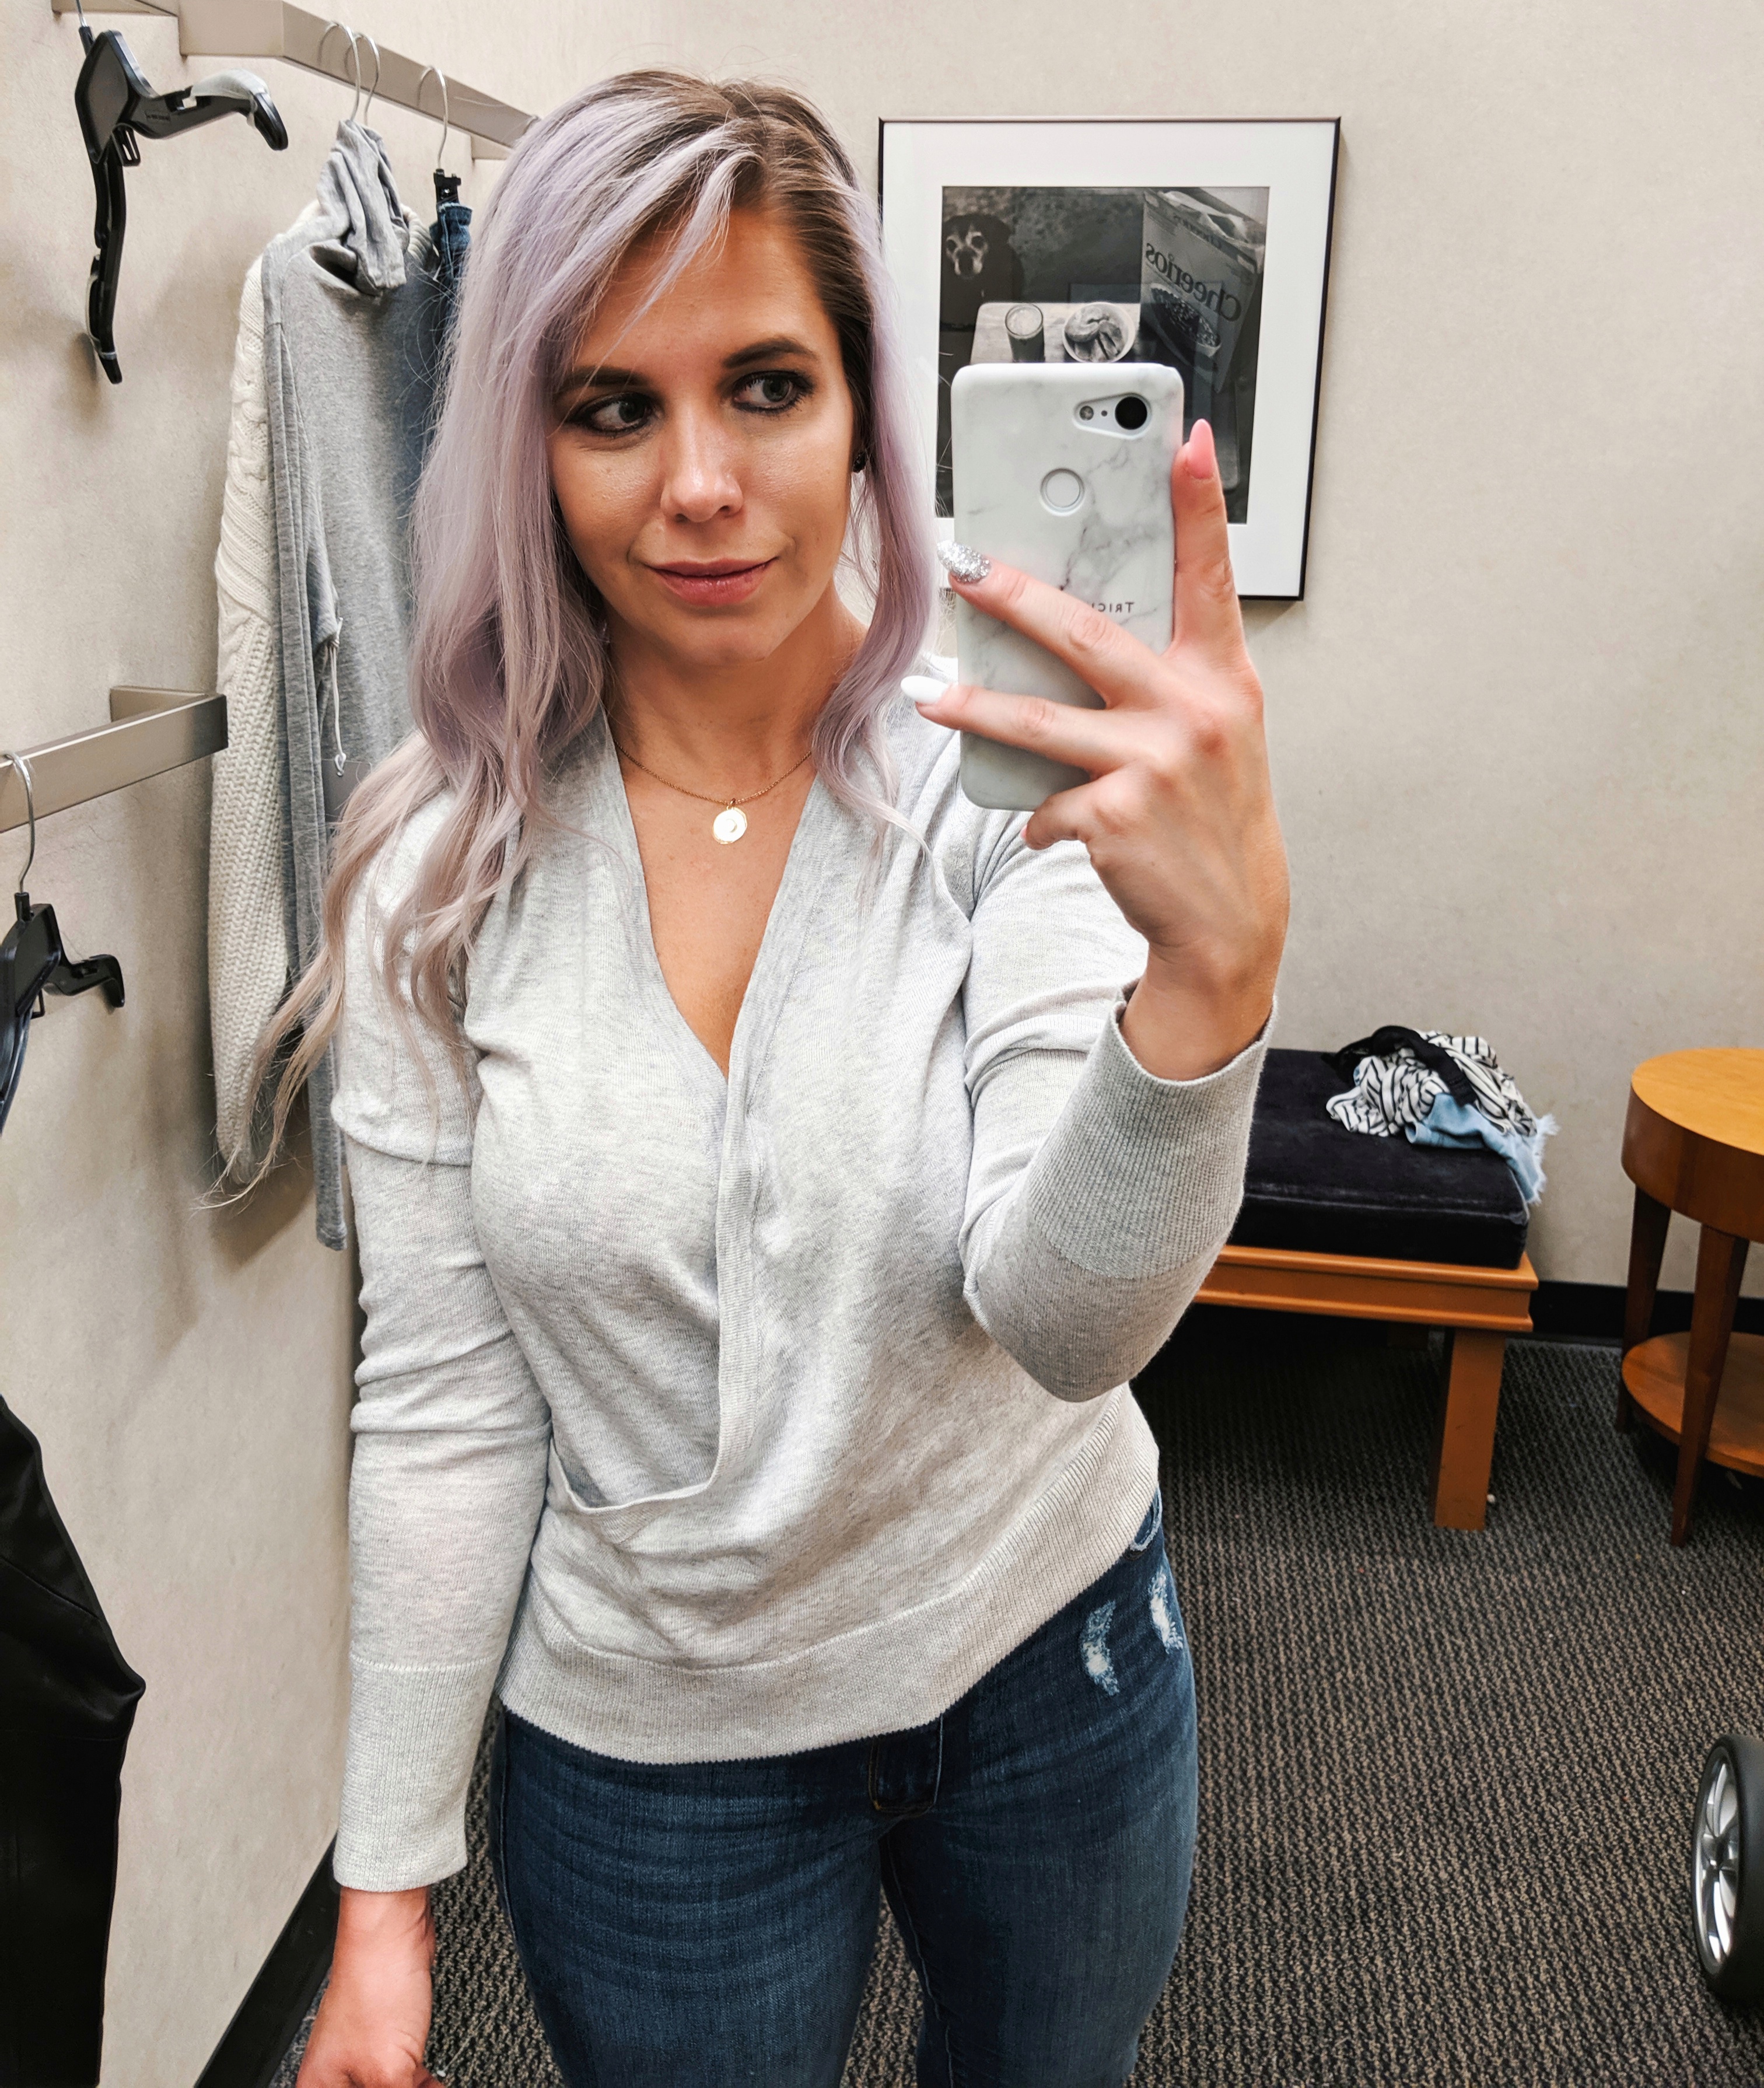 Nordstrom Anniversary Sale Public Access 2019 - NSALE Public Access 2019 Try On Haul. Petite fashion blogger Tricia Nibarger of COVET by tricia showcases top Nordstrom Anniversary Sale blogger picks. #NSALE #Nordstrom #LikeTKit